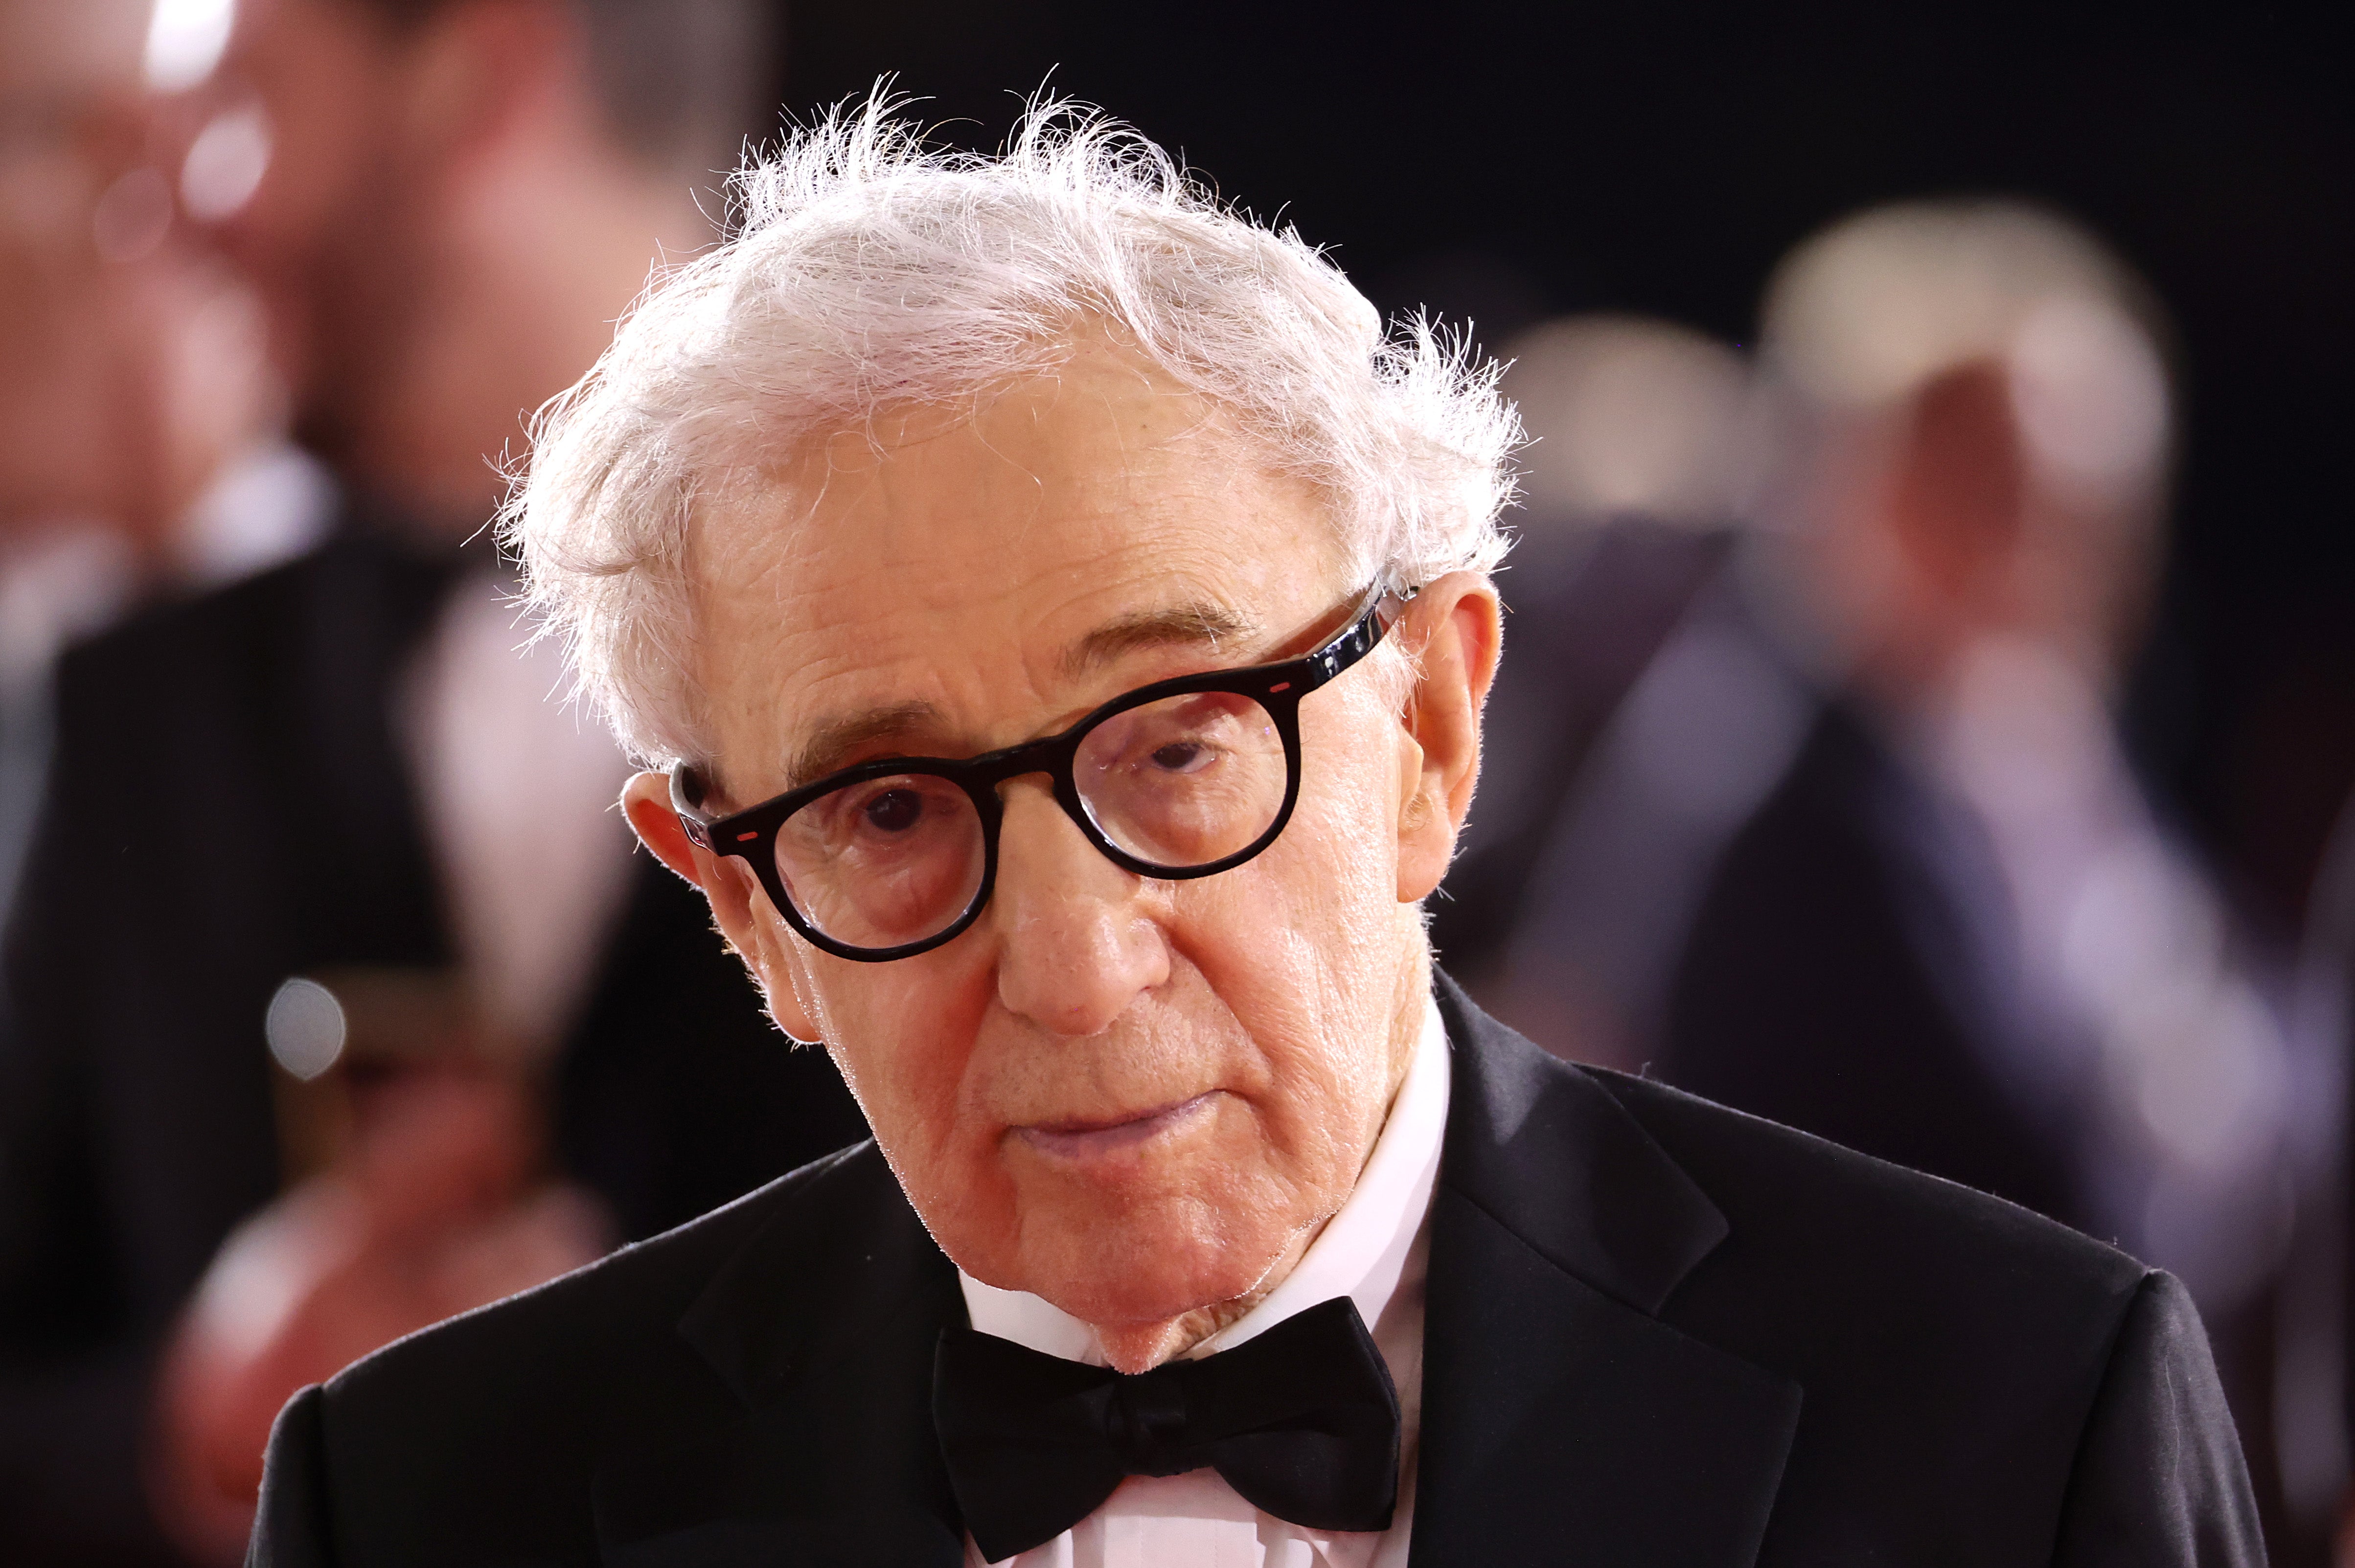 Woody Allen on the red carpet at the Venice premiere of his film ‘Coup de Chance’